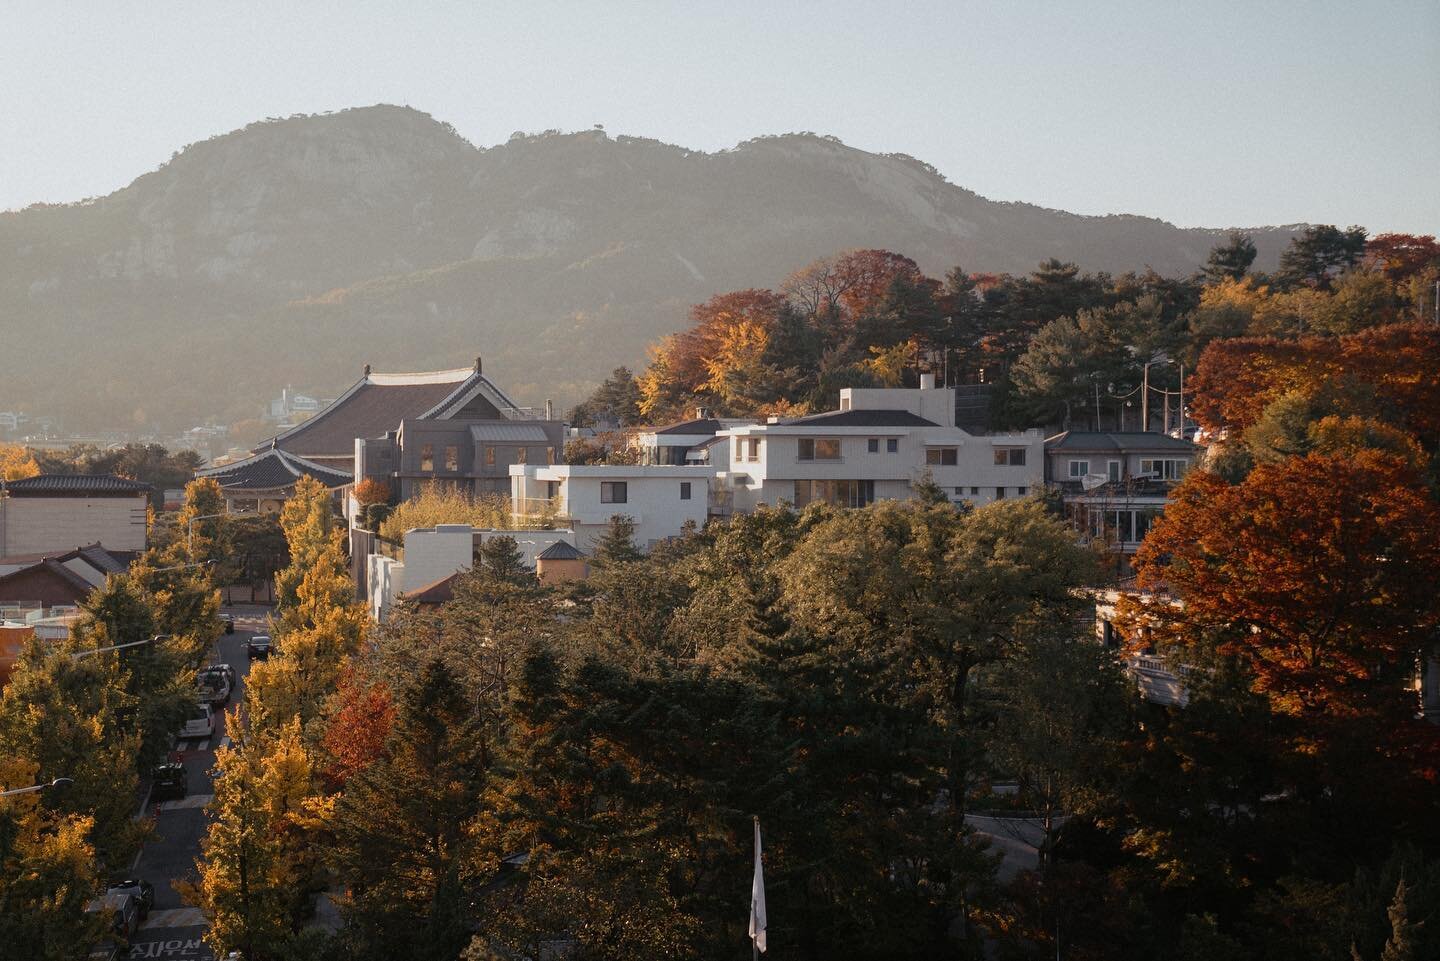 It&rsquo;s been a while since I visited a new country in Asia and South Korea didn&rsquo;t disappoint at all.

Exploring the 600 year old Bunchok Hanok village with my camera at sunset and being surrounded by all the autumn colours is something I&rsq